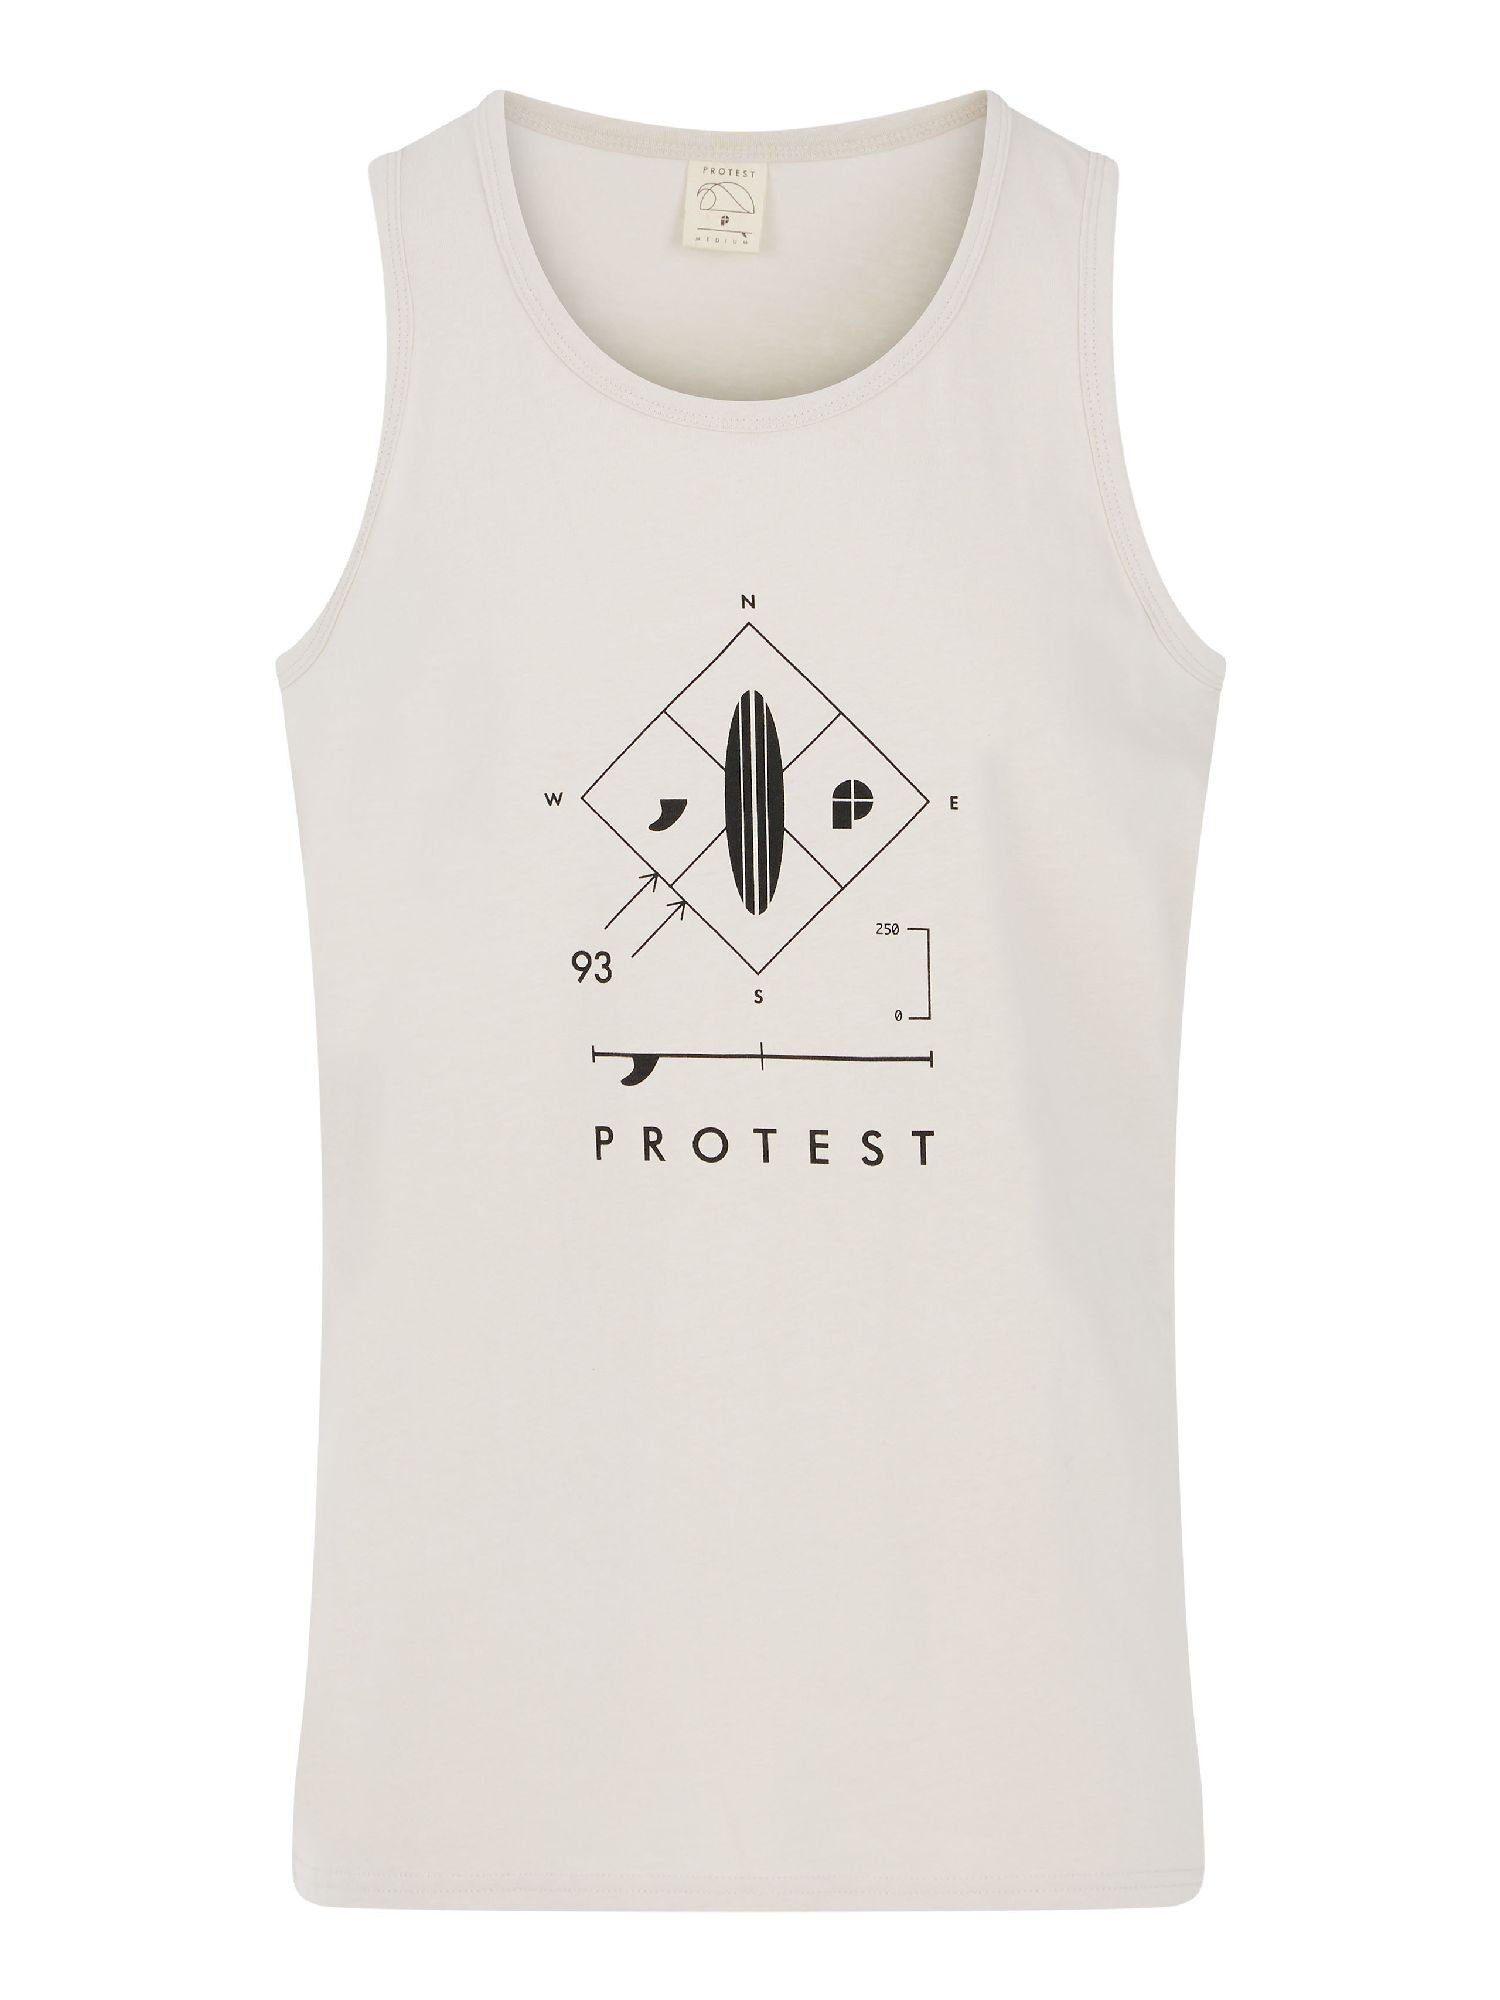 Protest Prtrally - Camiseta sin mangas - Hombre | Hardloop